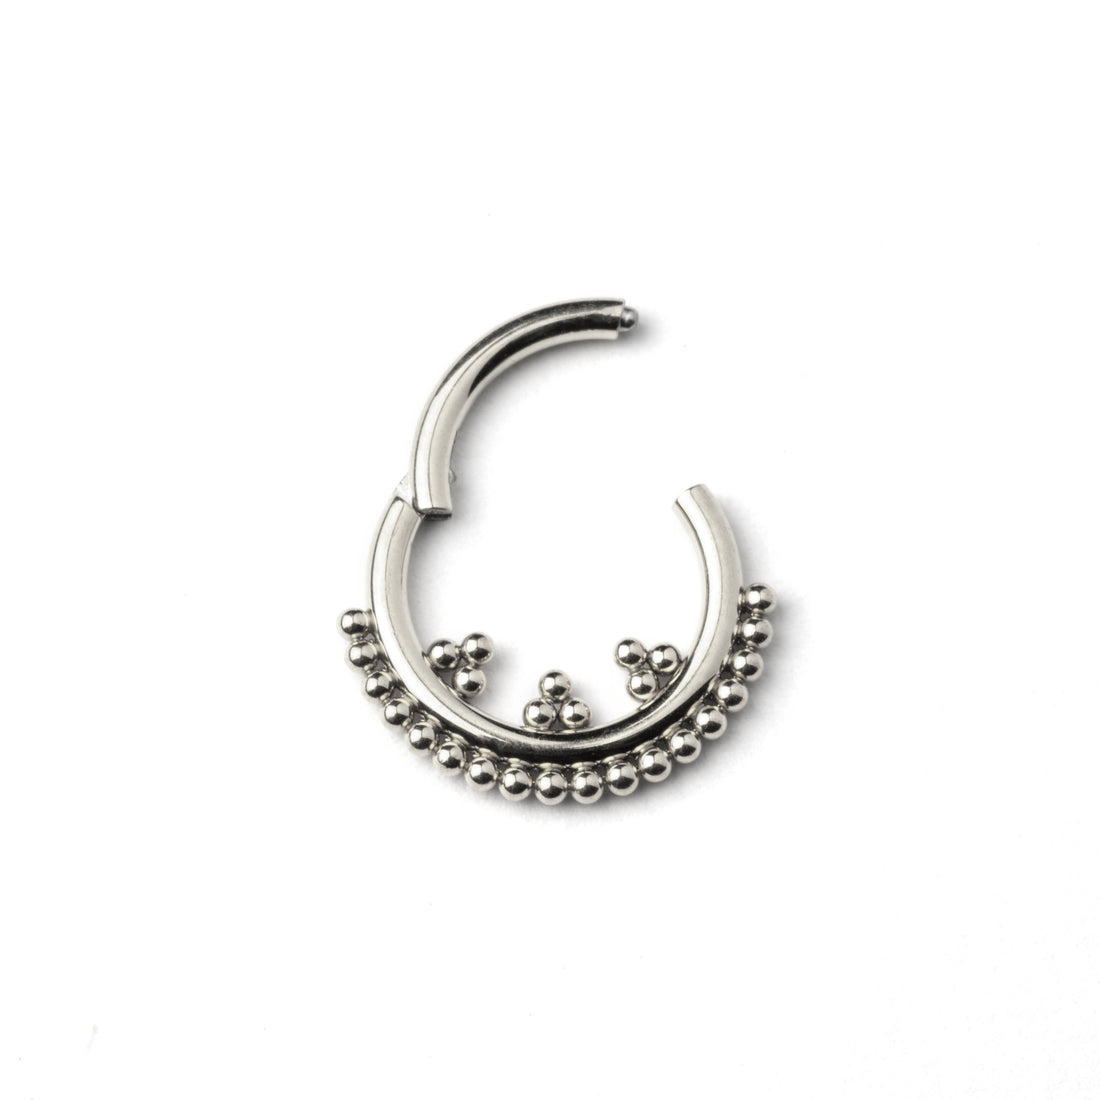 Orbit surgical steel septum clicker with dots ornaments closure view